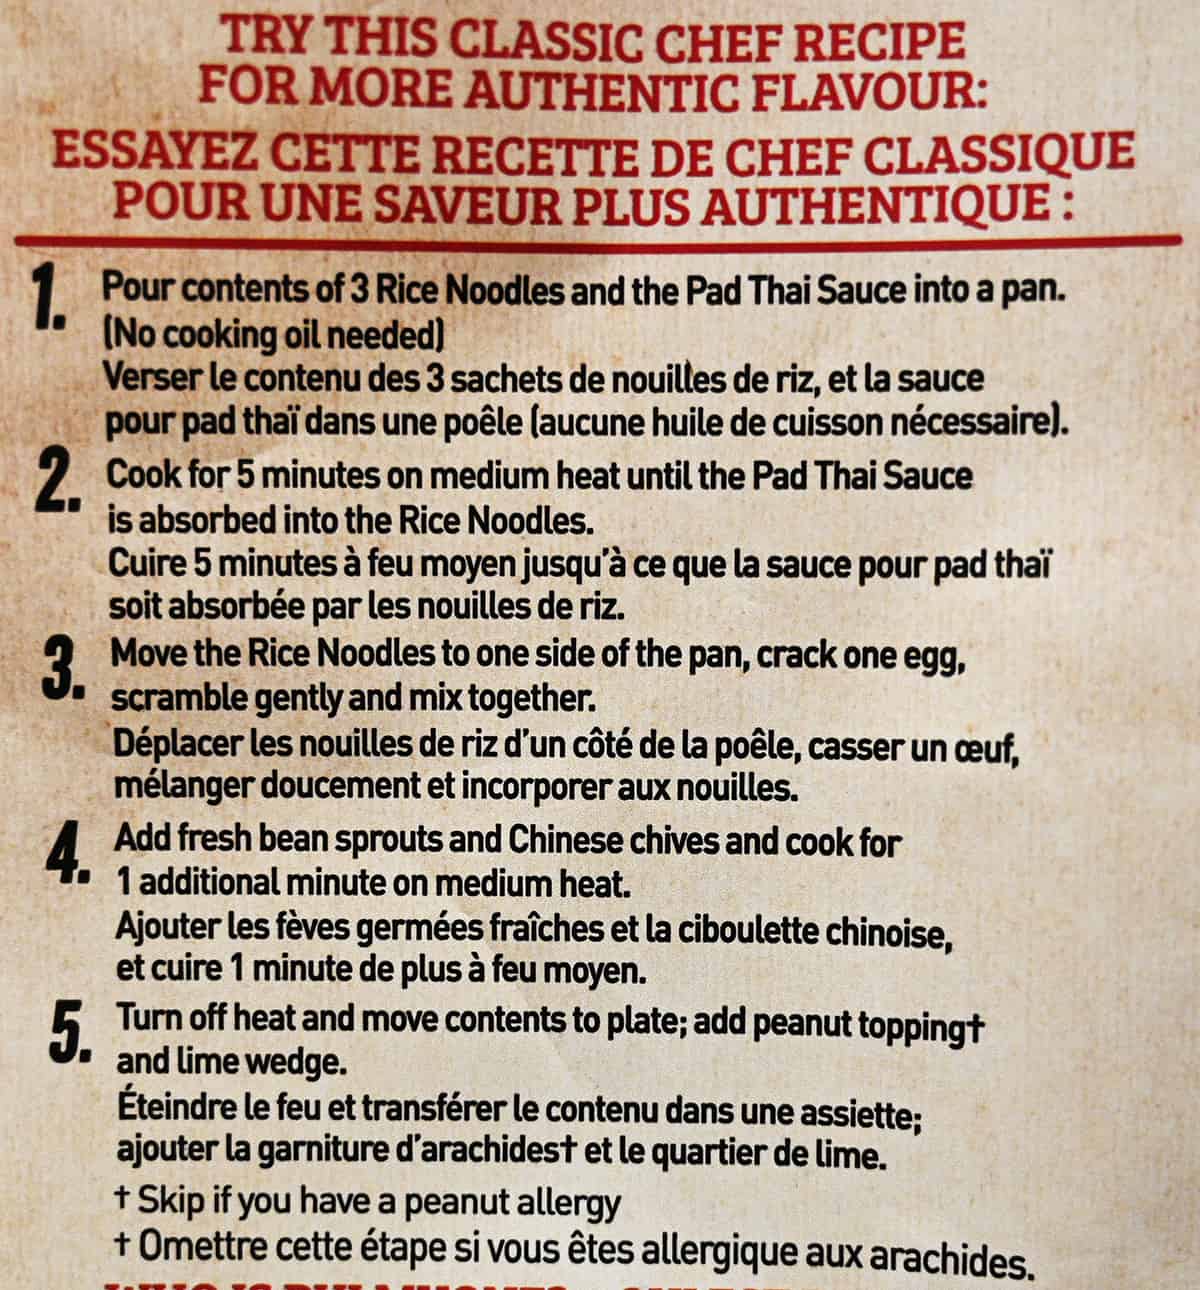 Image of a classic chef recipe for Pad Thai from the back of the package.